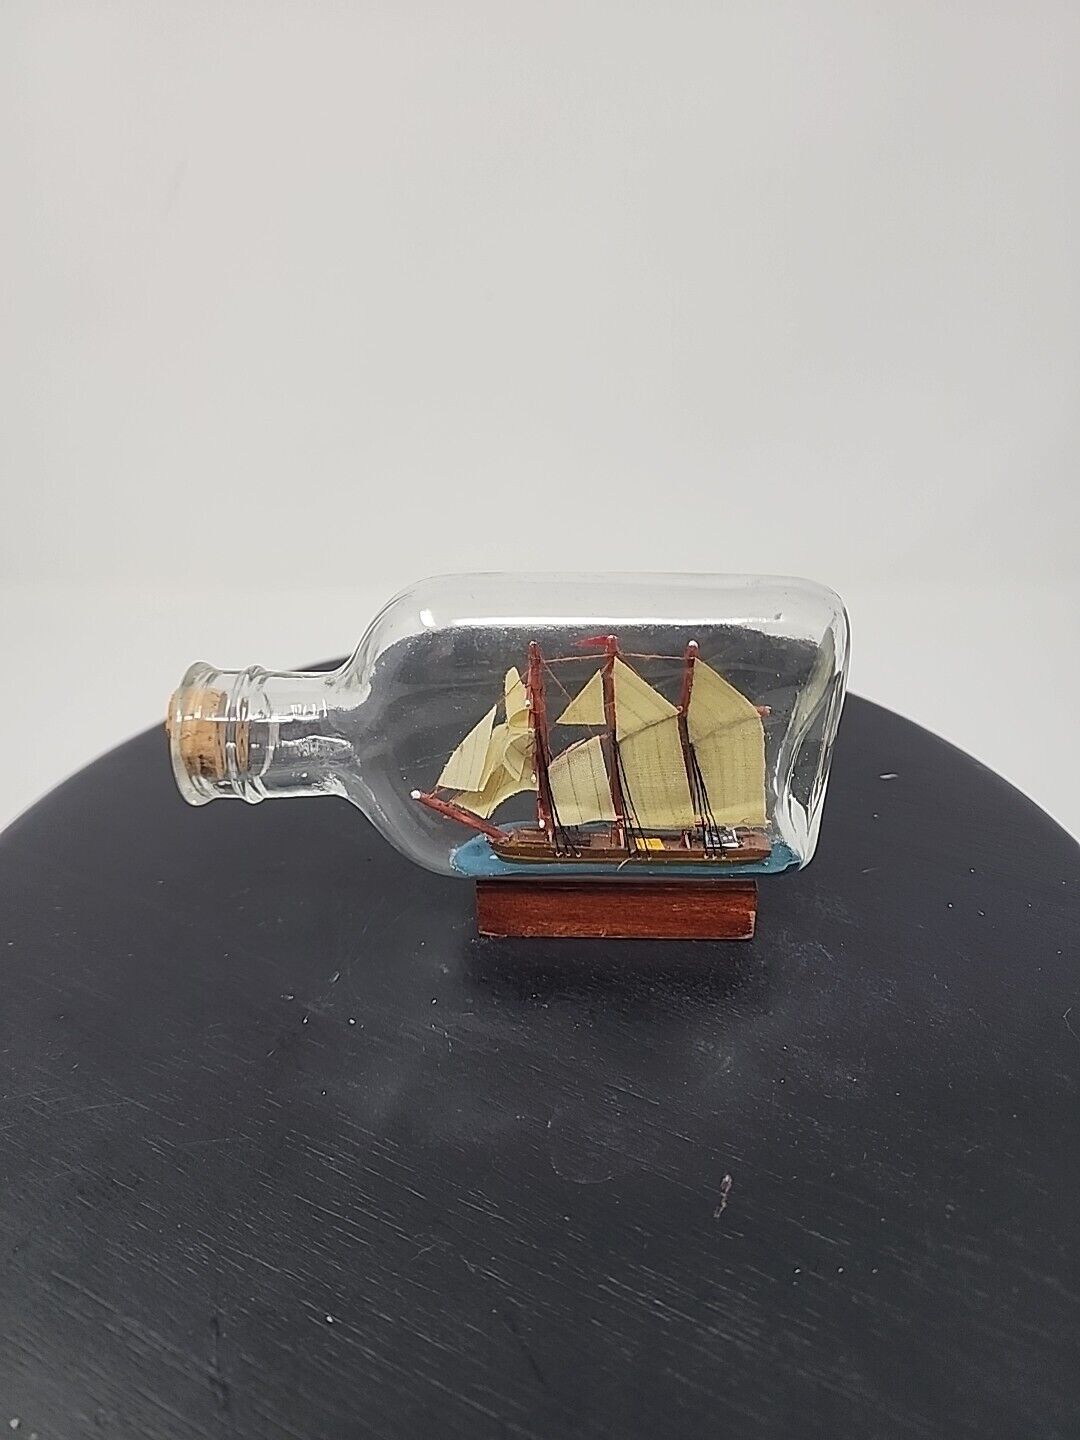 Vintage ship in a bottle - Mini galleon ship in a glass bottle - Mid century...